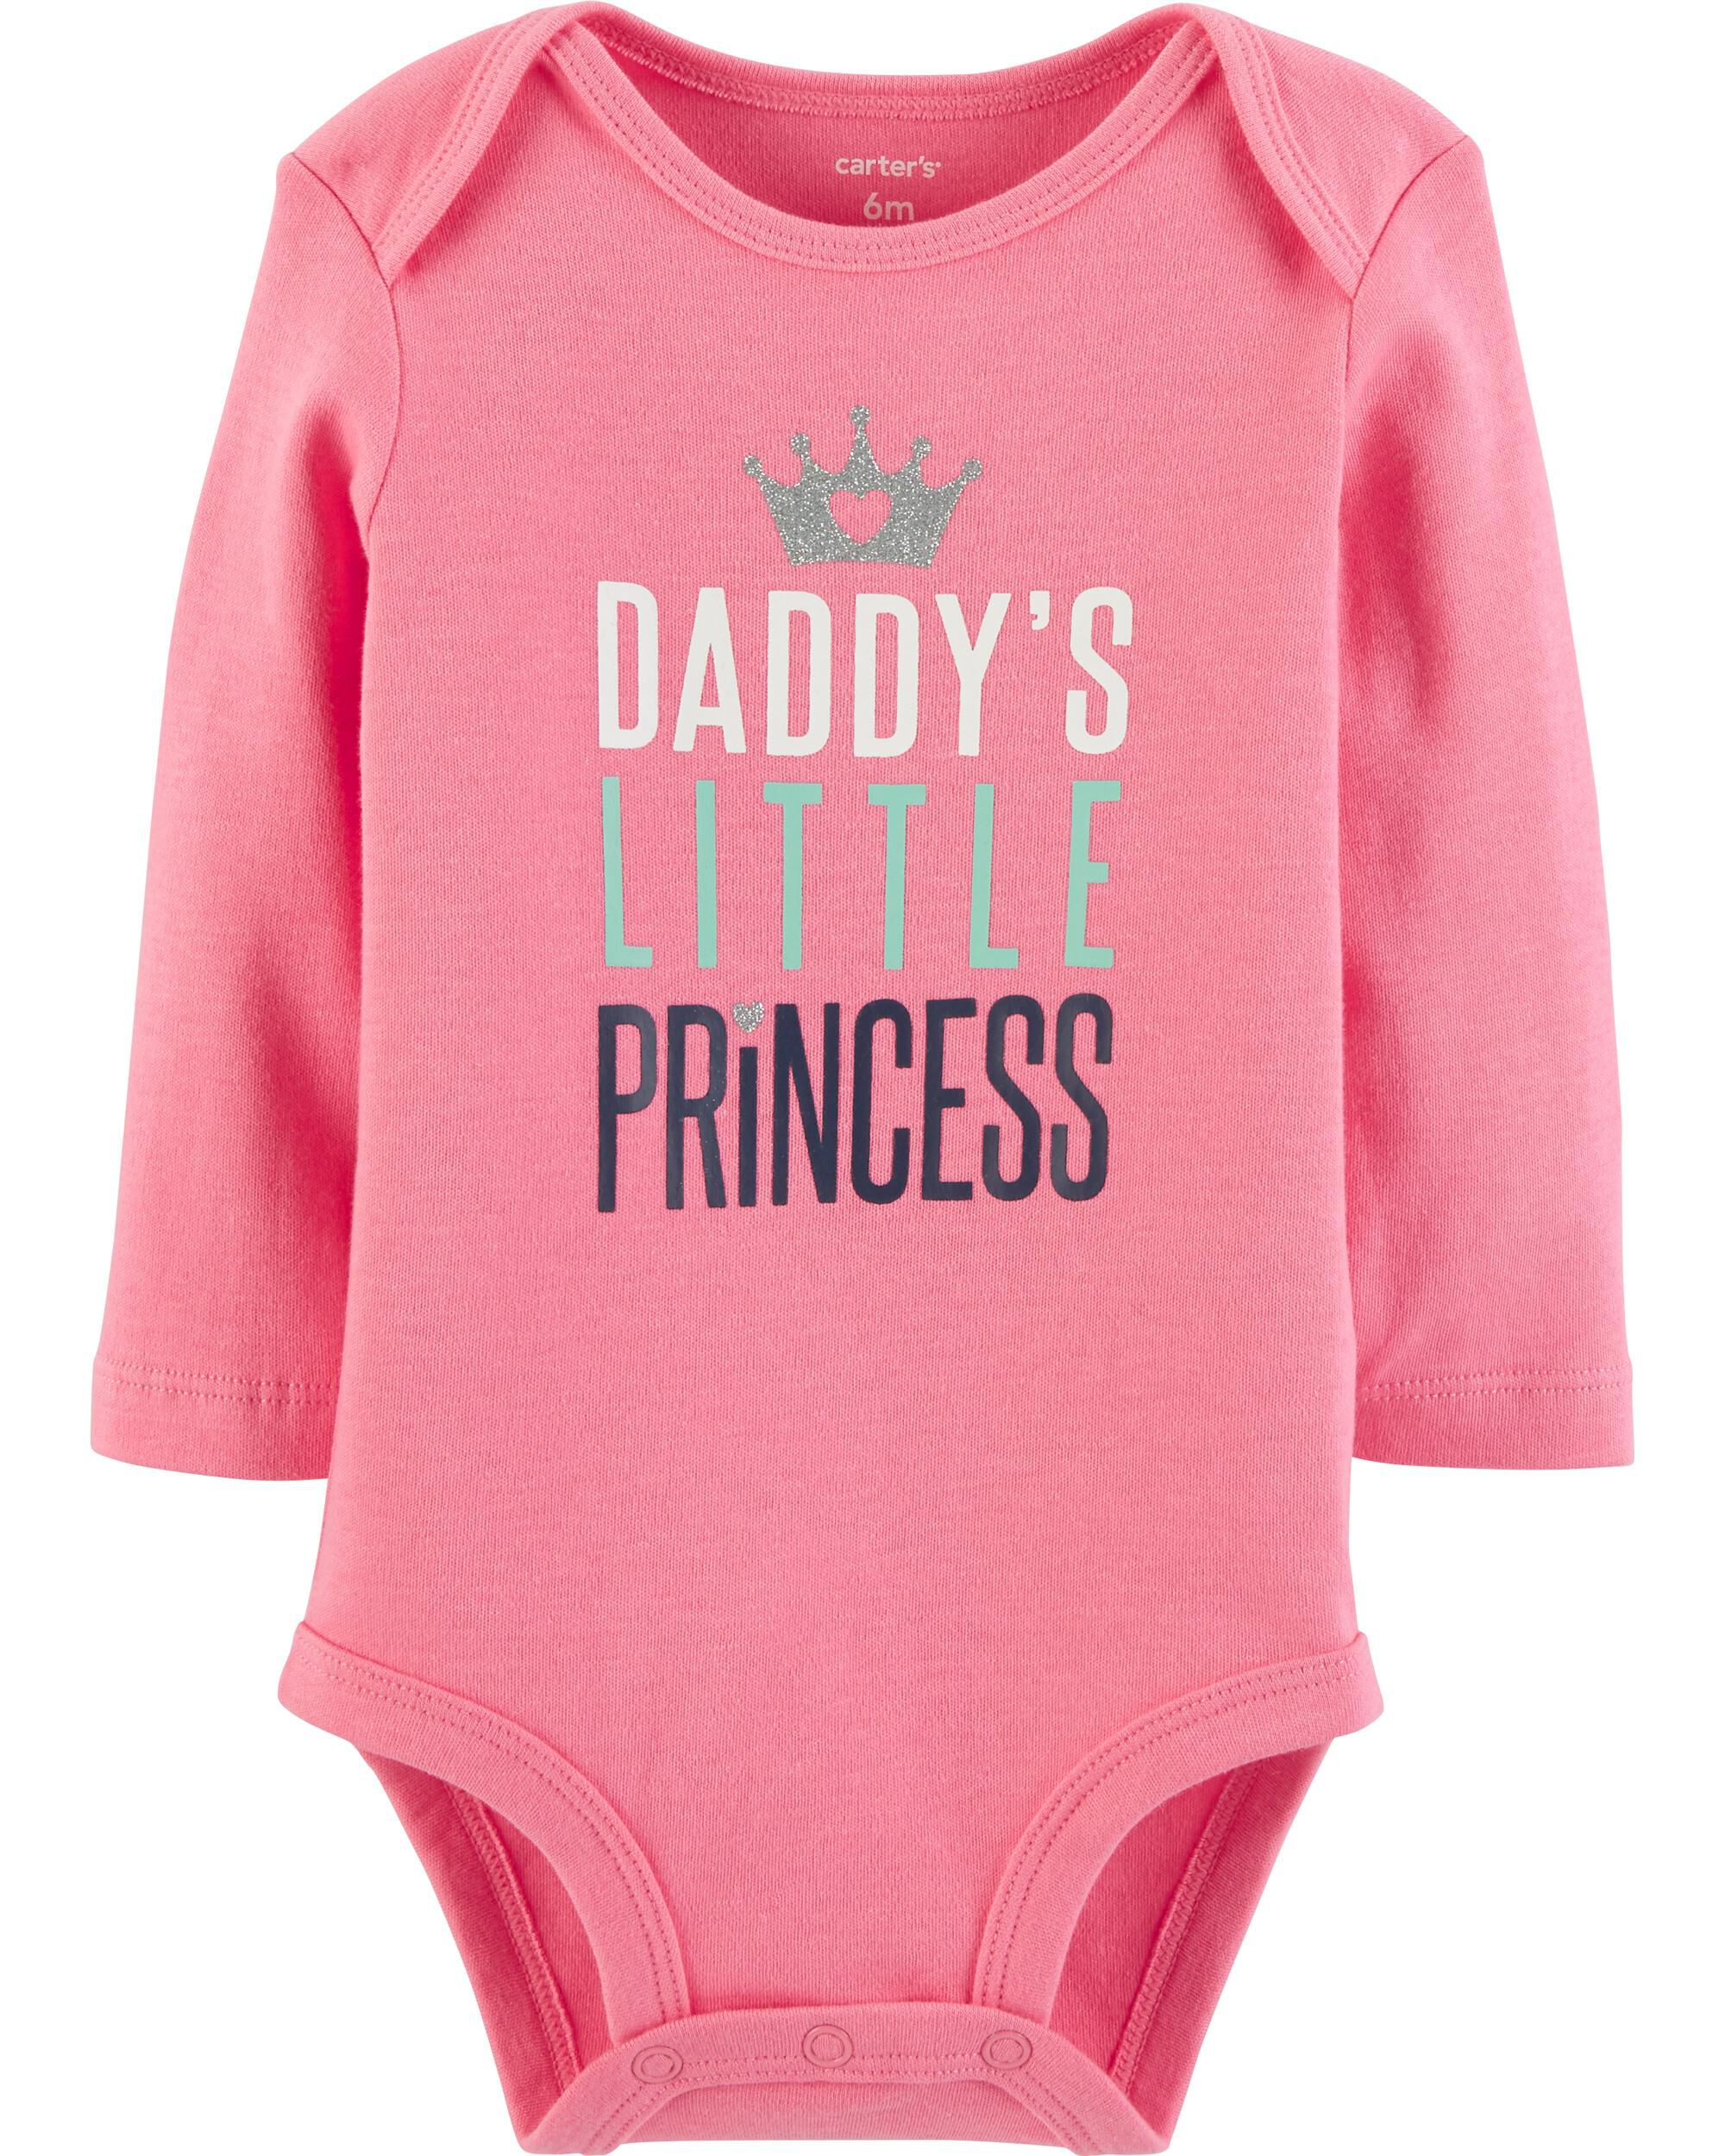 daddy's little girl newborn outfit